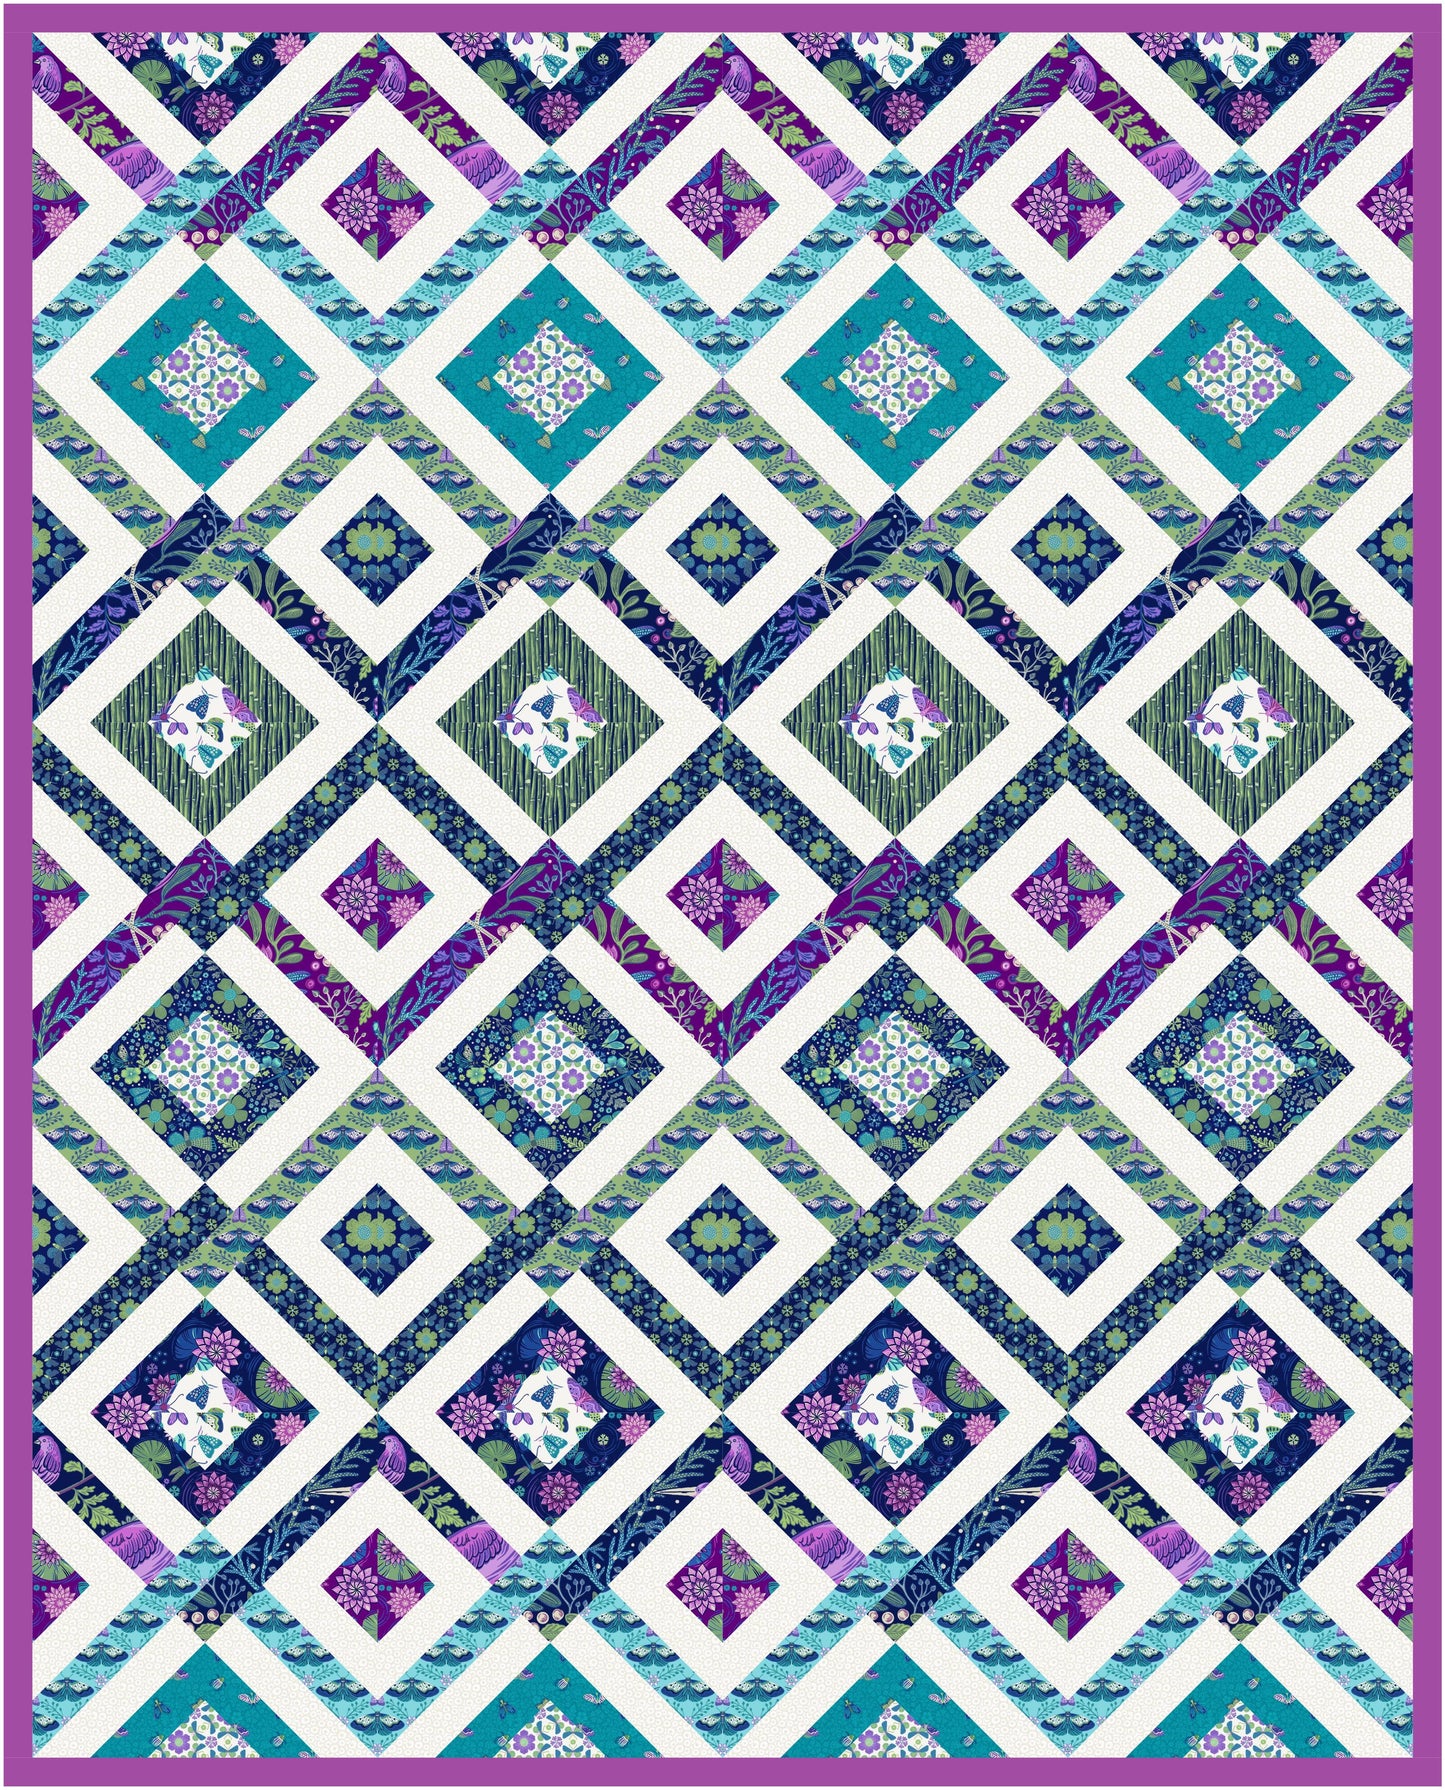 Water's Edge Entangled Quilt Pattern